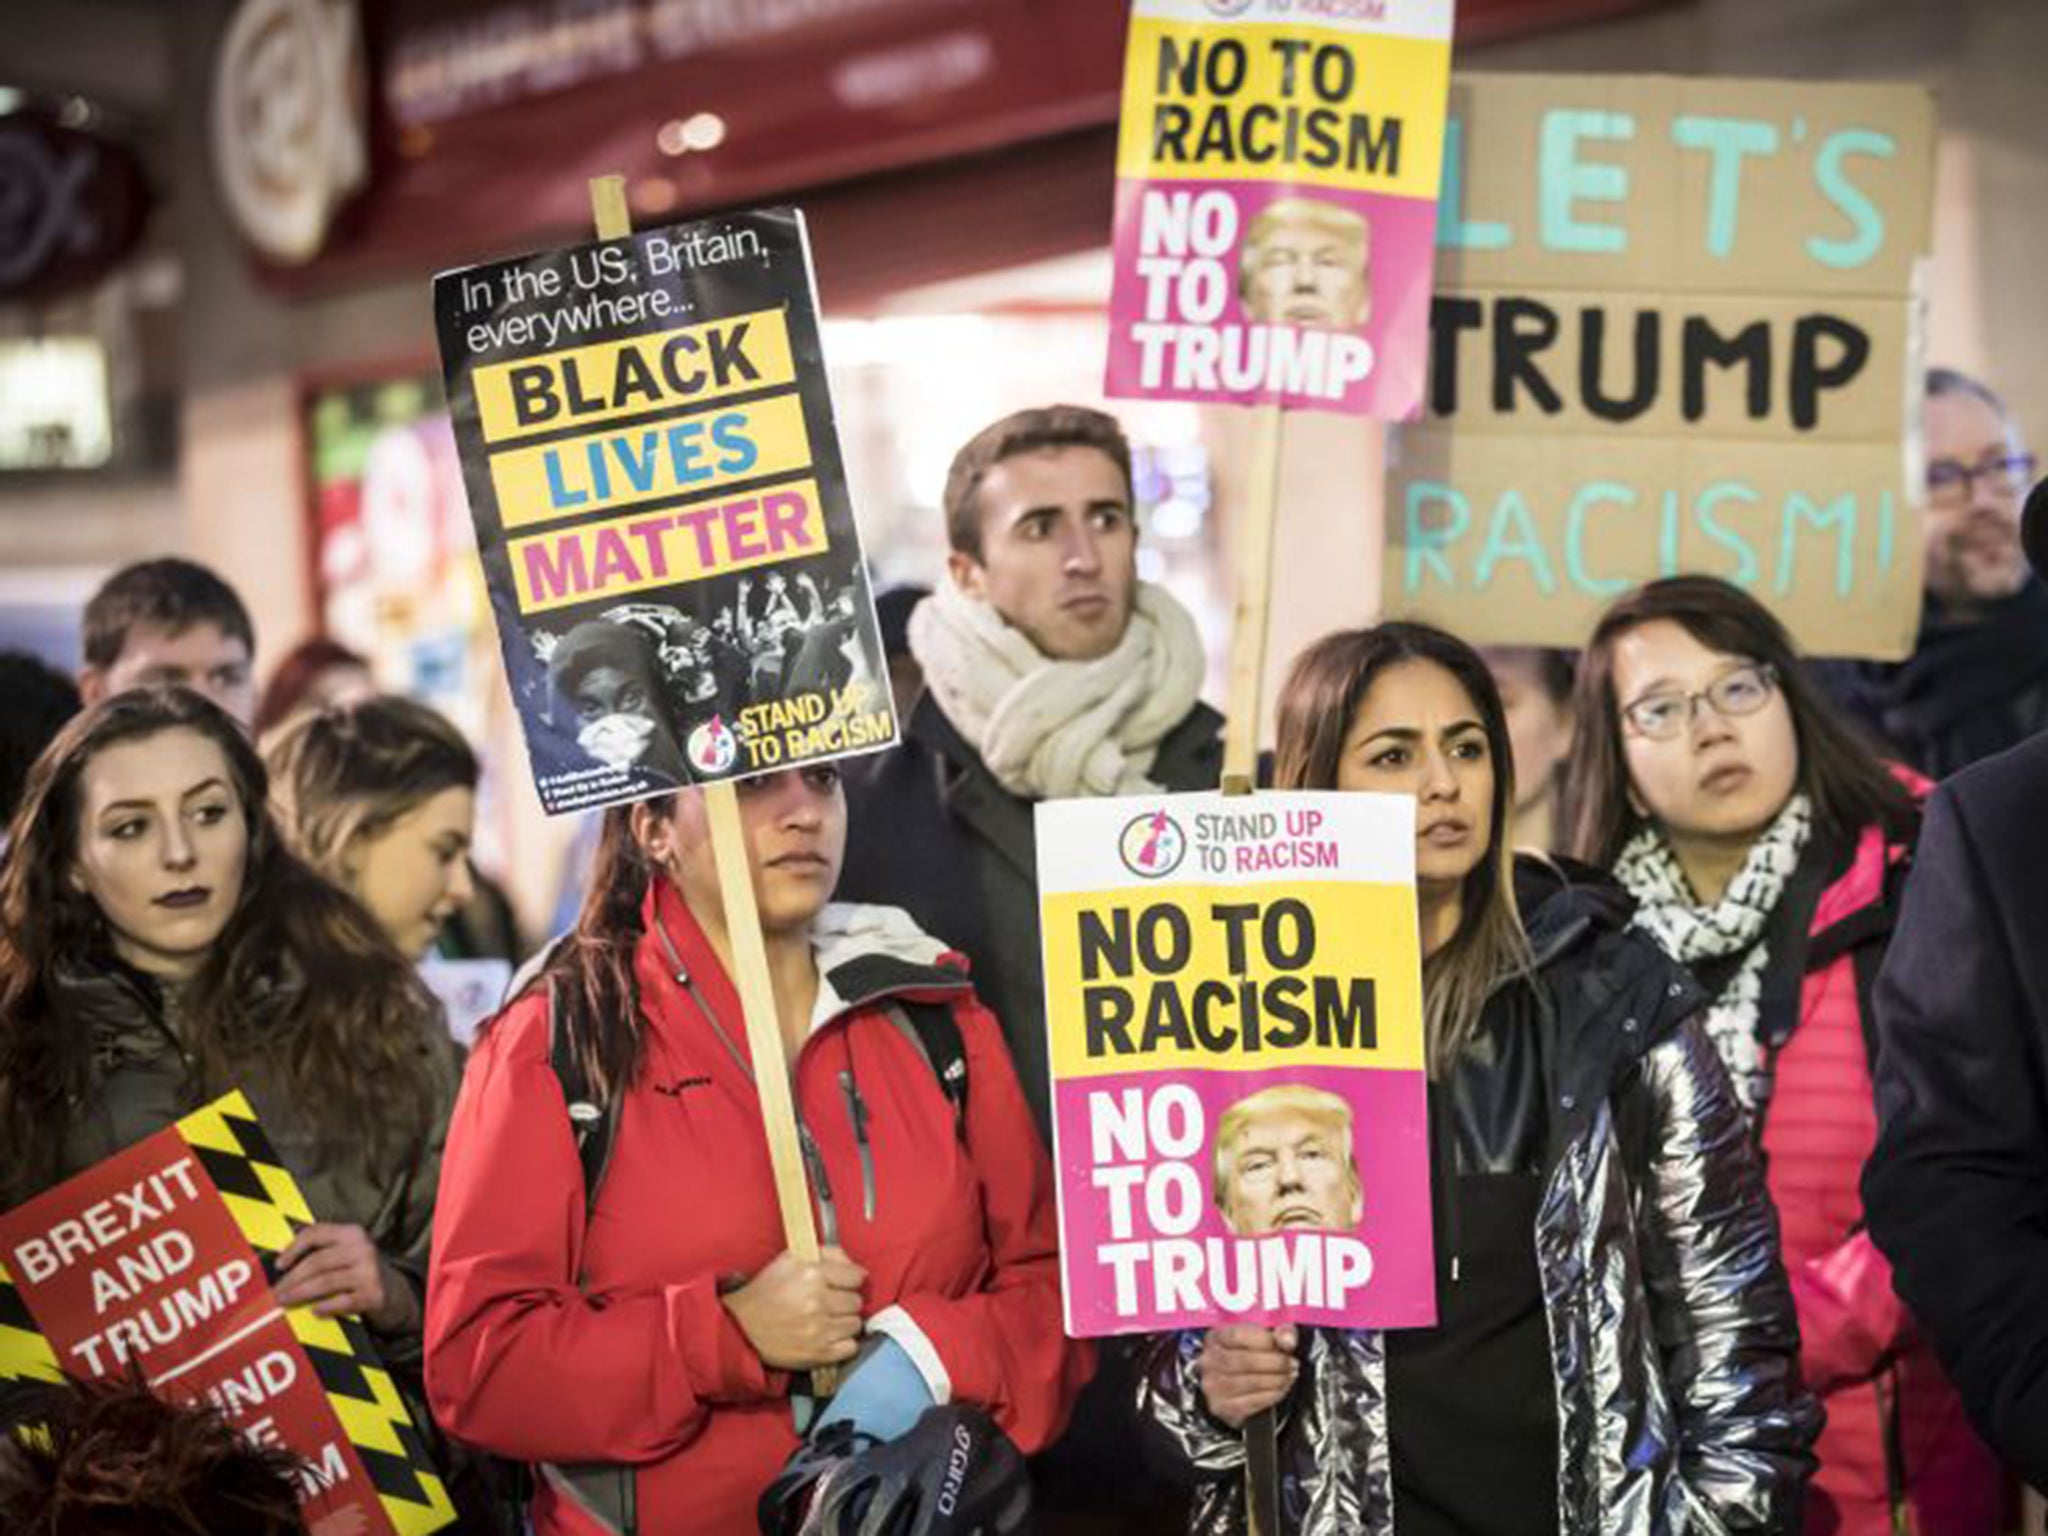 Anti-Trump protesters also took to the streets in central Leeds